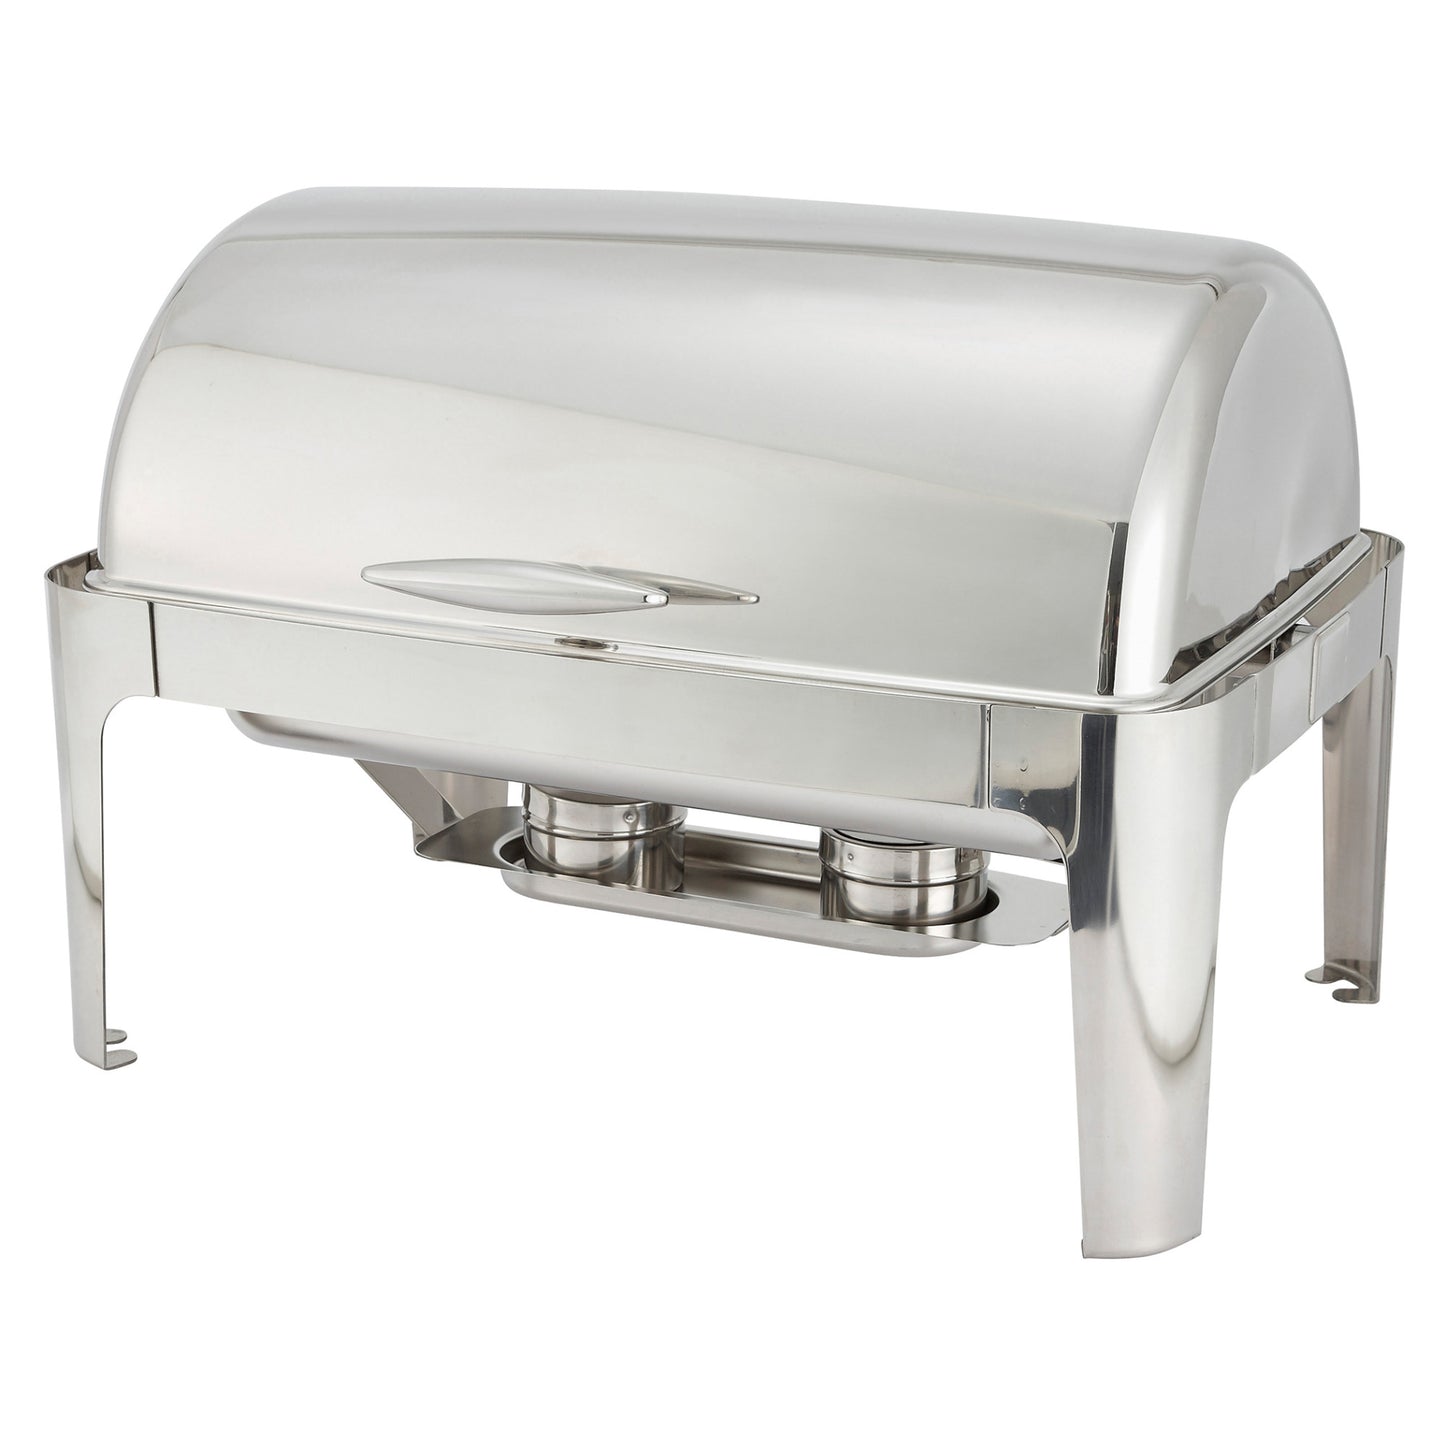 601 - Madison Collection 8 Quart Full-Size Roll-Top Chafer, Heavyweight